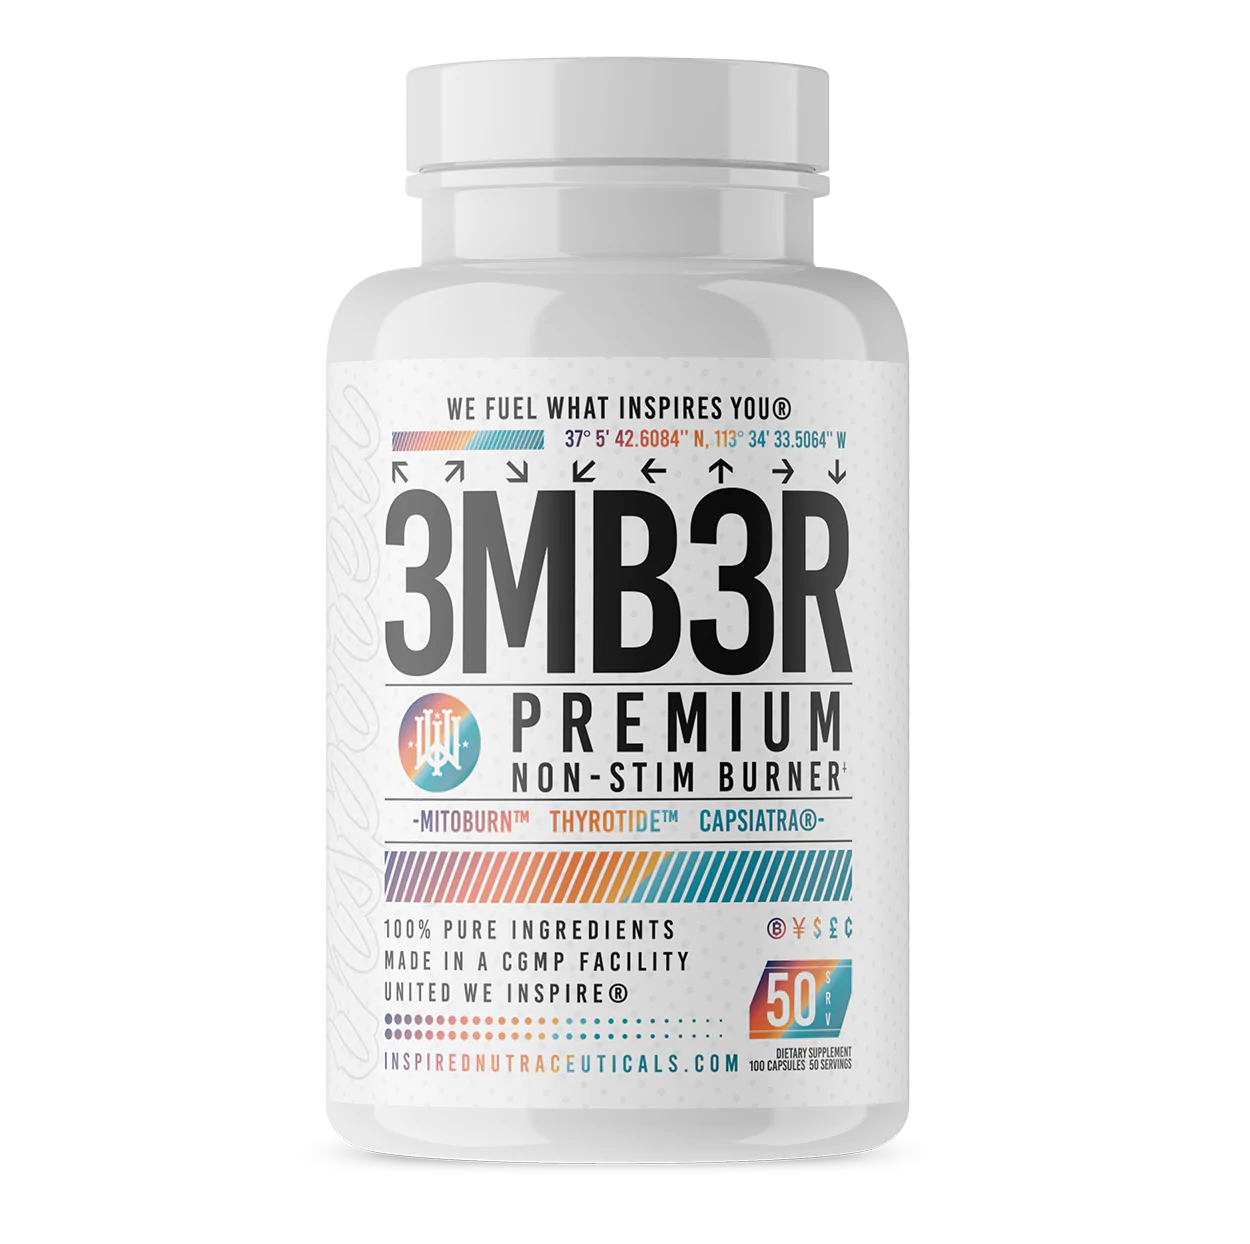 Inspired Nutraceuticals Ember Non-Stim Thermogenic